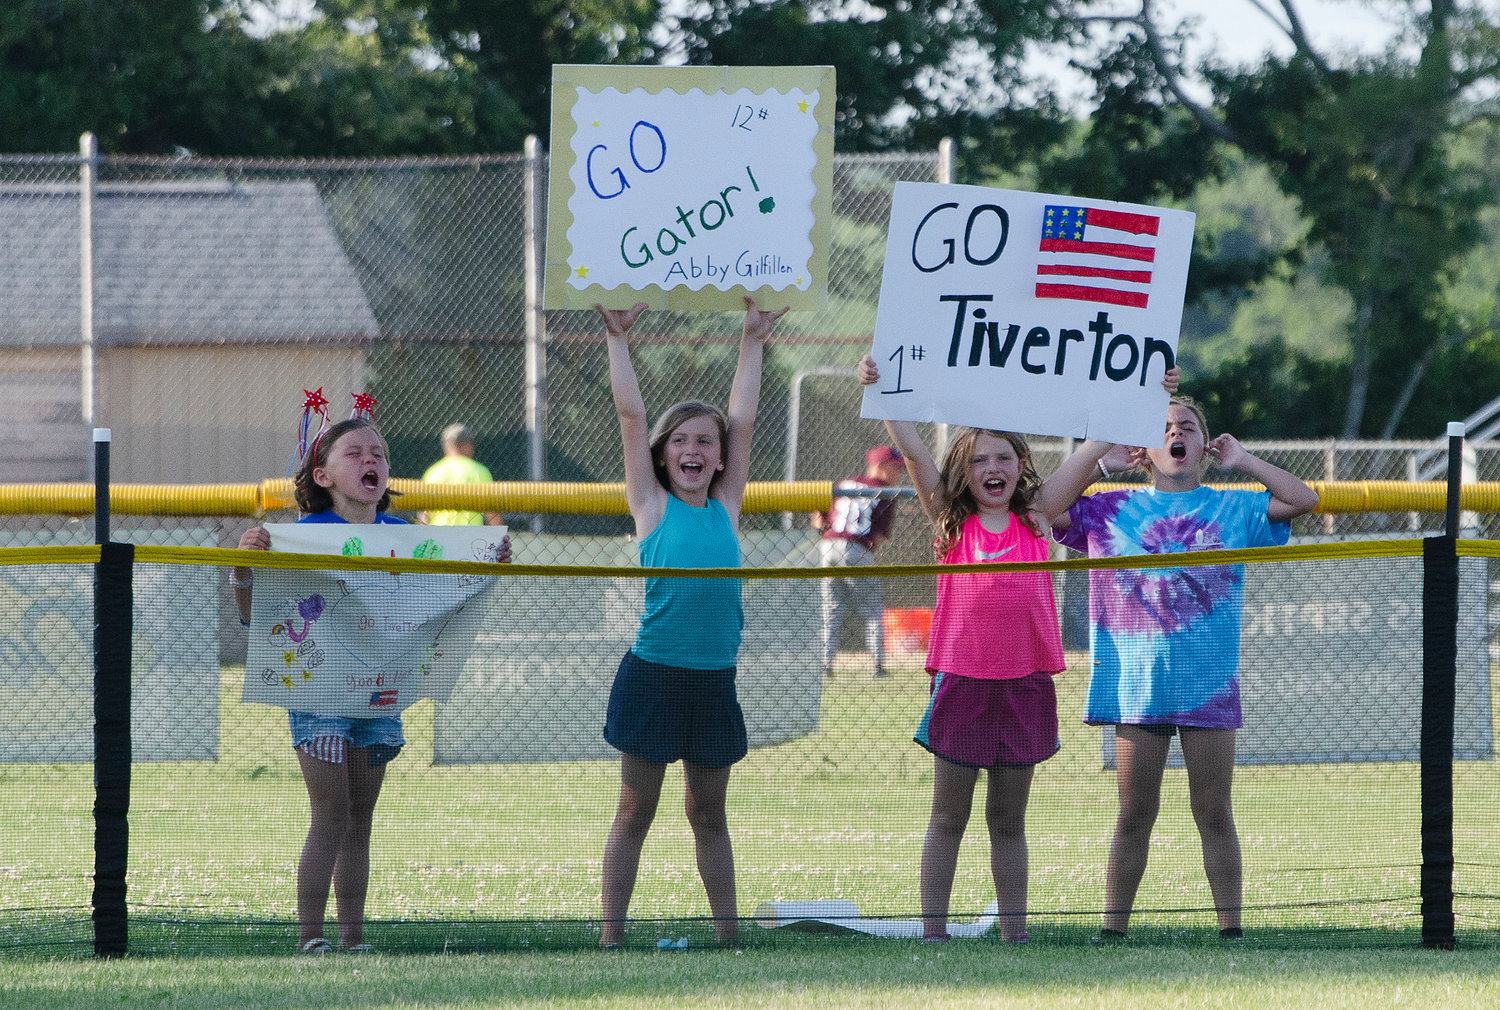 The Tiverton all stars super fans hold up signs and cheer in right field.